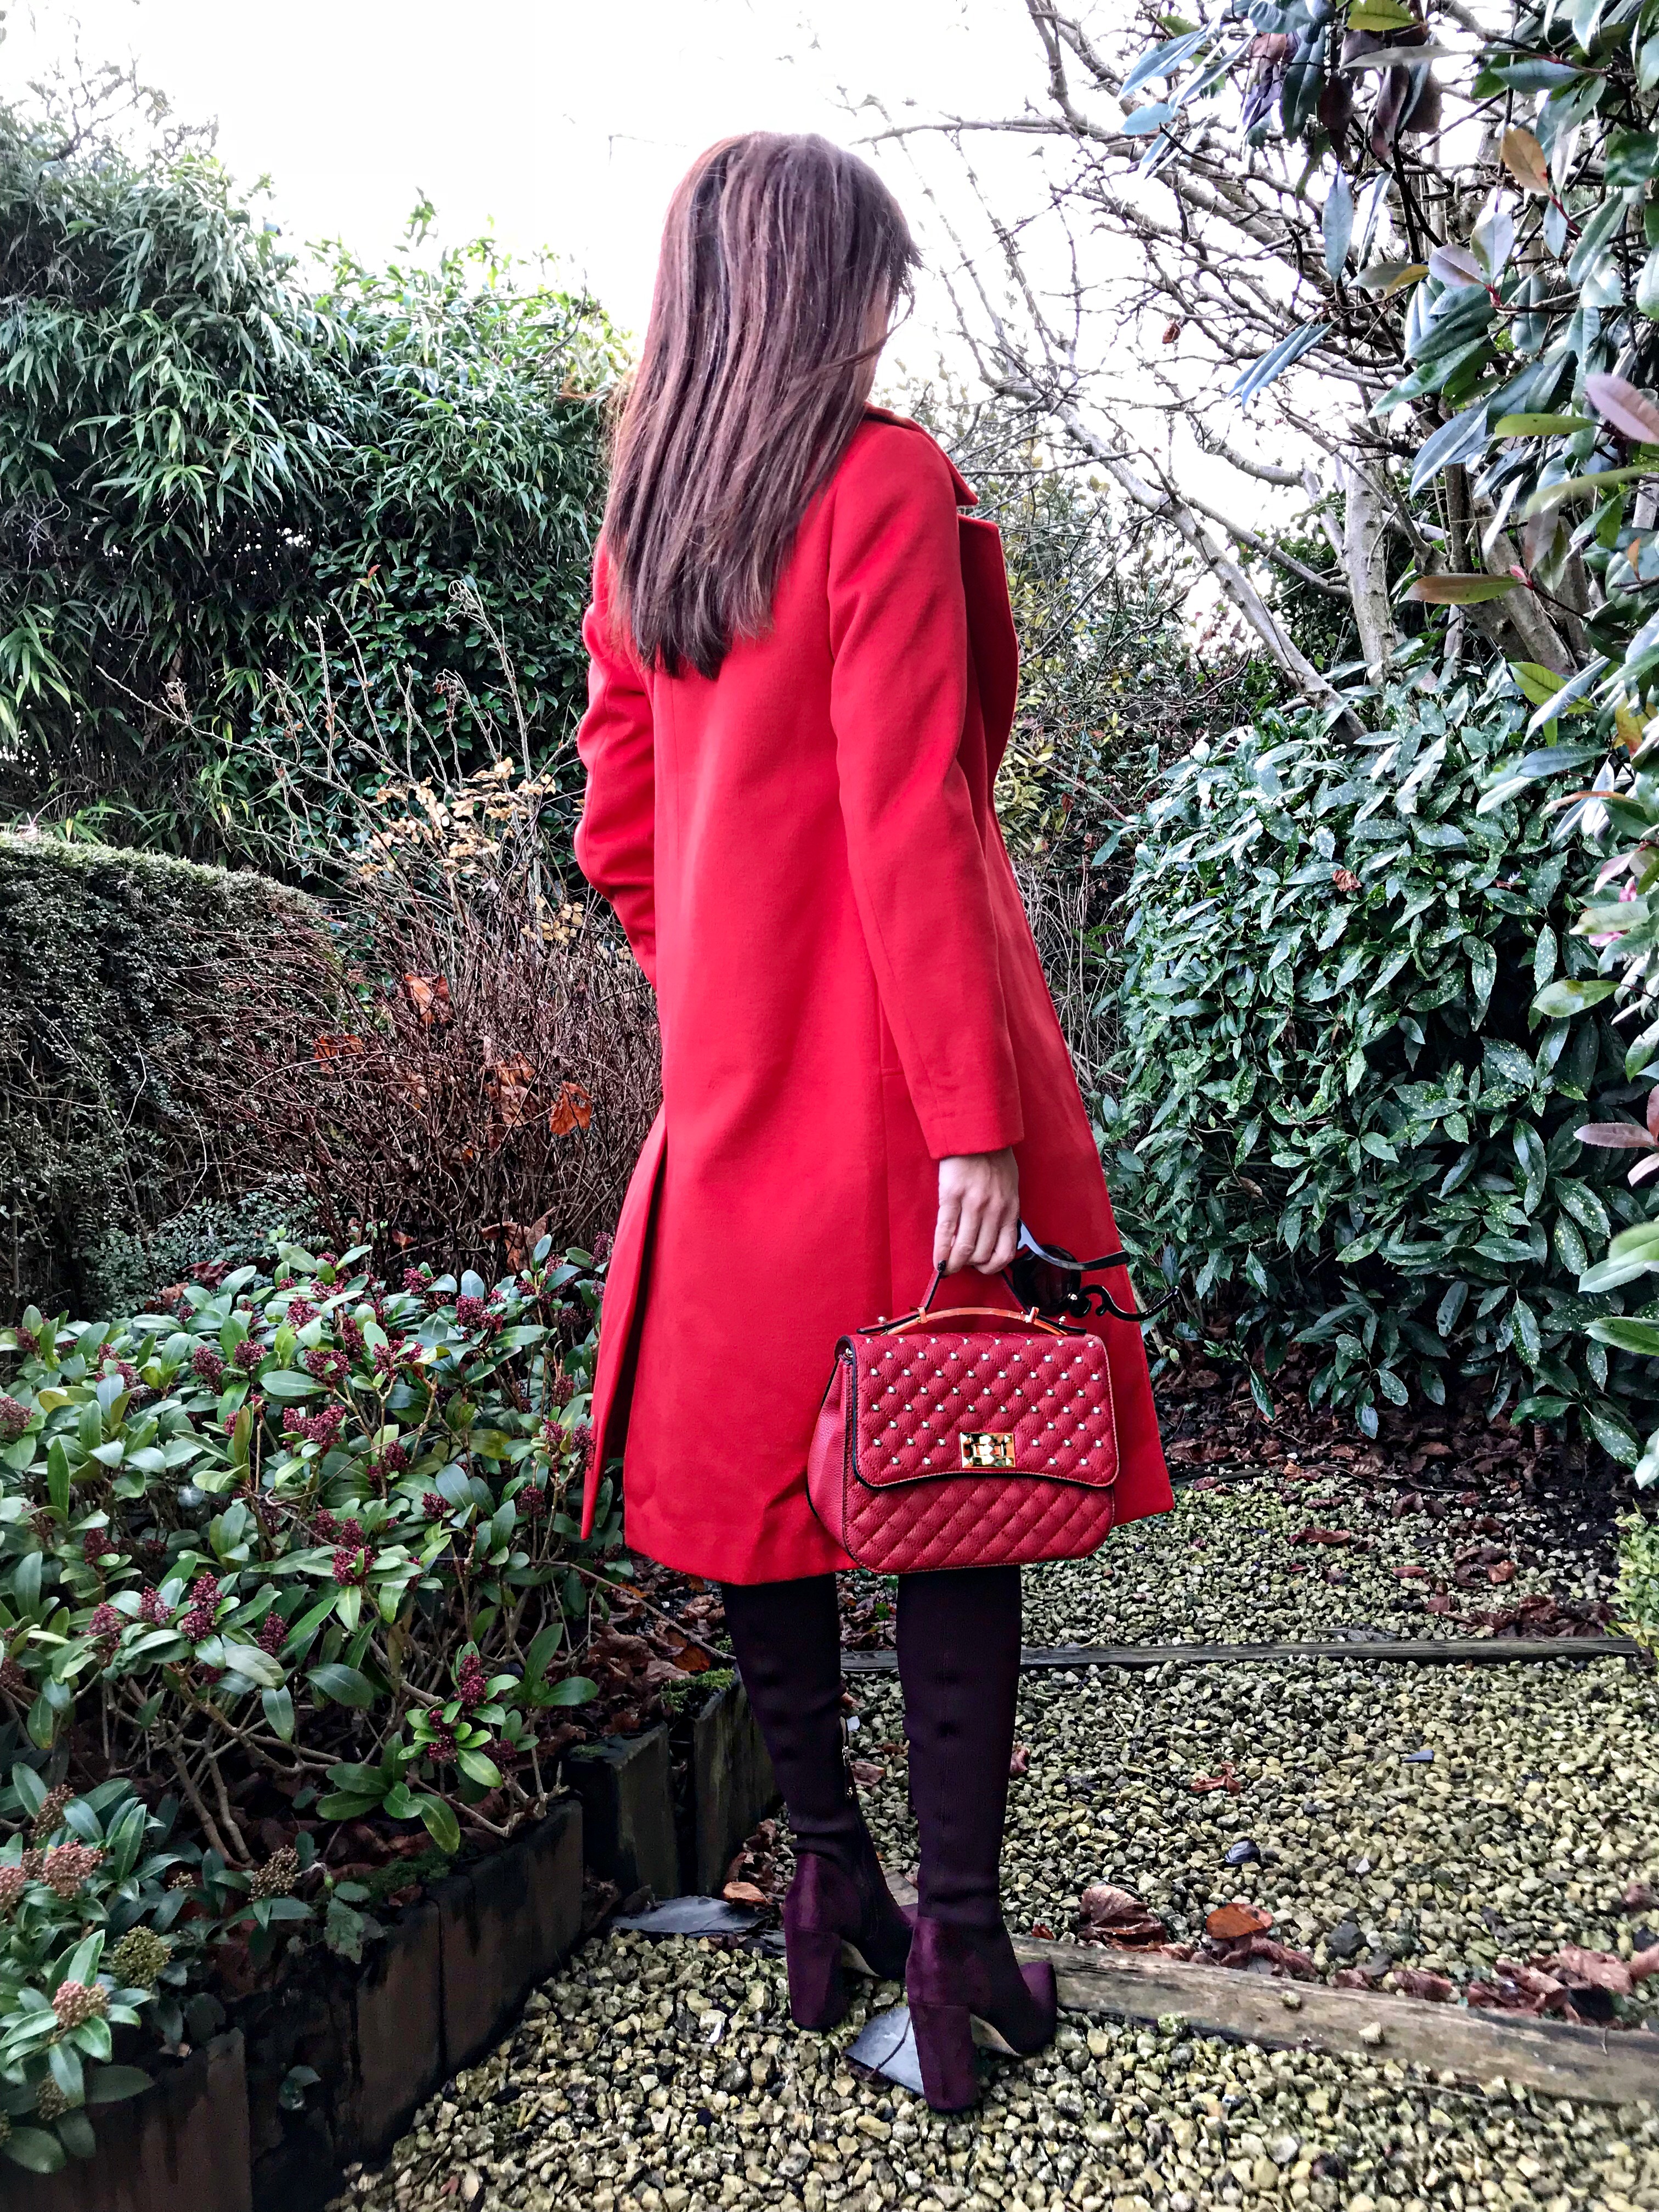 Miss Selfridge Smart Midi Coat | V by Very Quilt and Stud Satchel | River Island River Island Knitted Over The Knee Boots- Dark Red | Abercrombie & Fitch Burgundy Long Sleeve Knit Dress Shades of Valentine | Red long coat & Burgundy boots | Swarovski earrings | Baroque Prada sunglasses